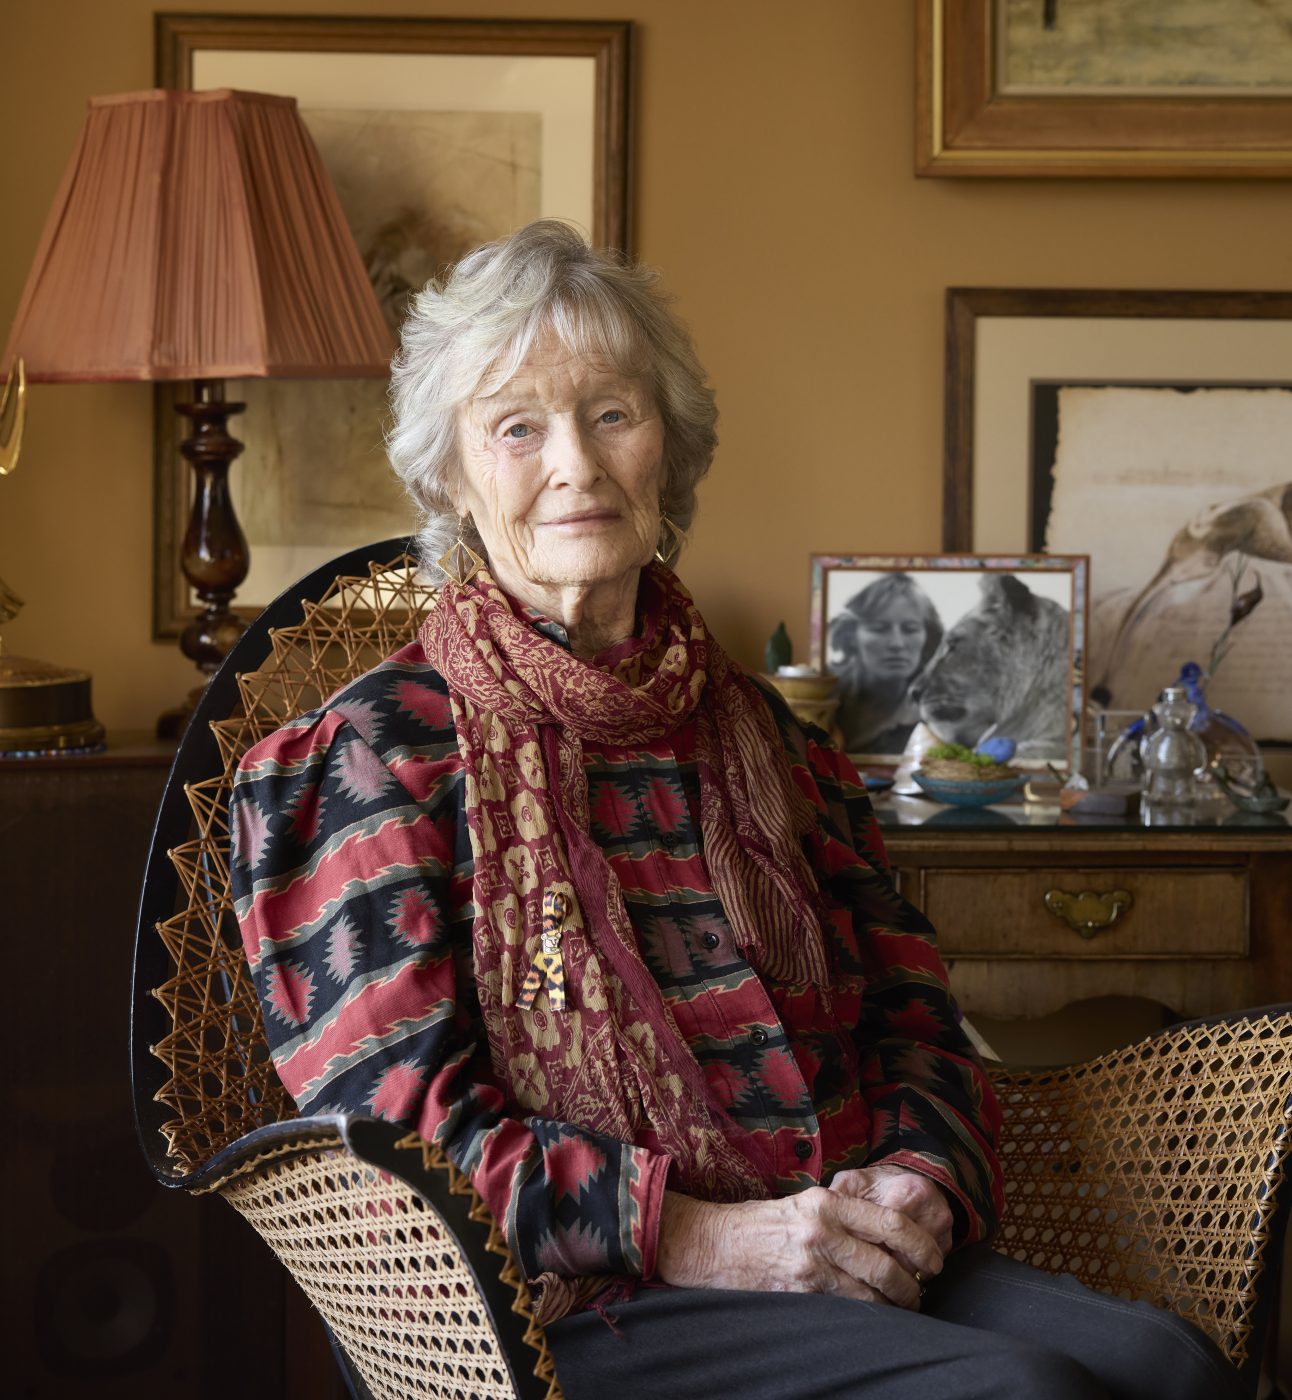 Dame Virginia McKenna sitting in an armchair, looking towards the camera with her hands in her lap. Behind her is a framed photo of her and Girl, the lion who played Elsa in the film Born Free